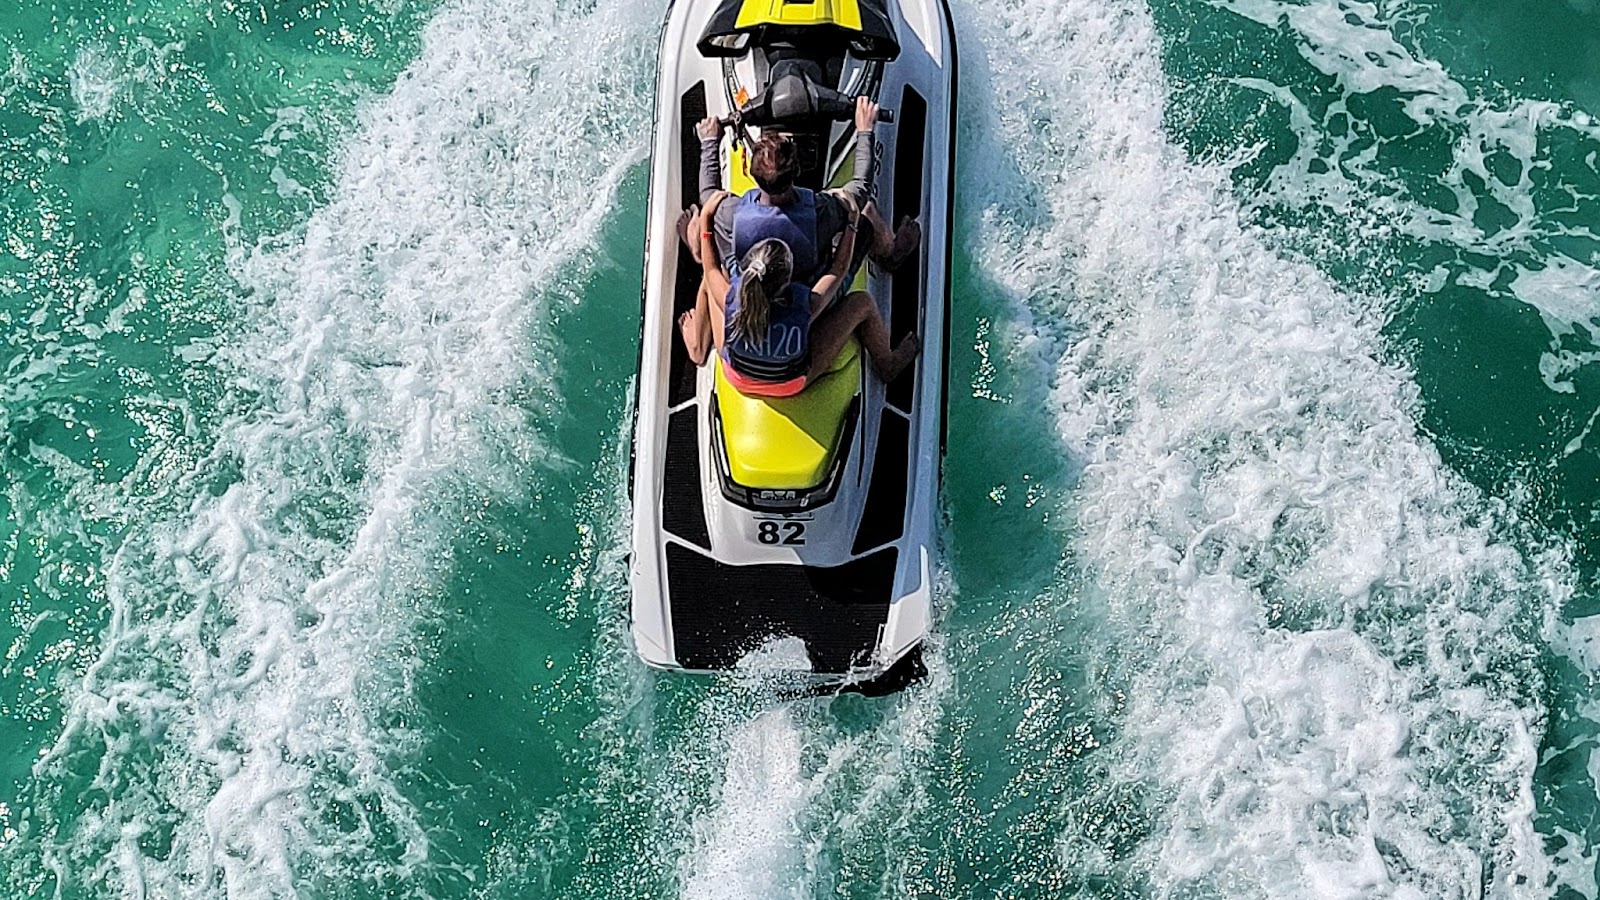 Three friends are riding in a waverunner.